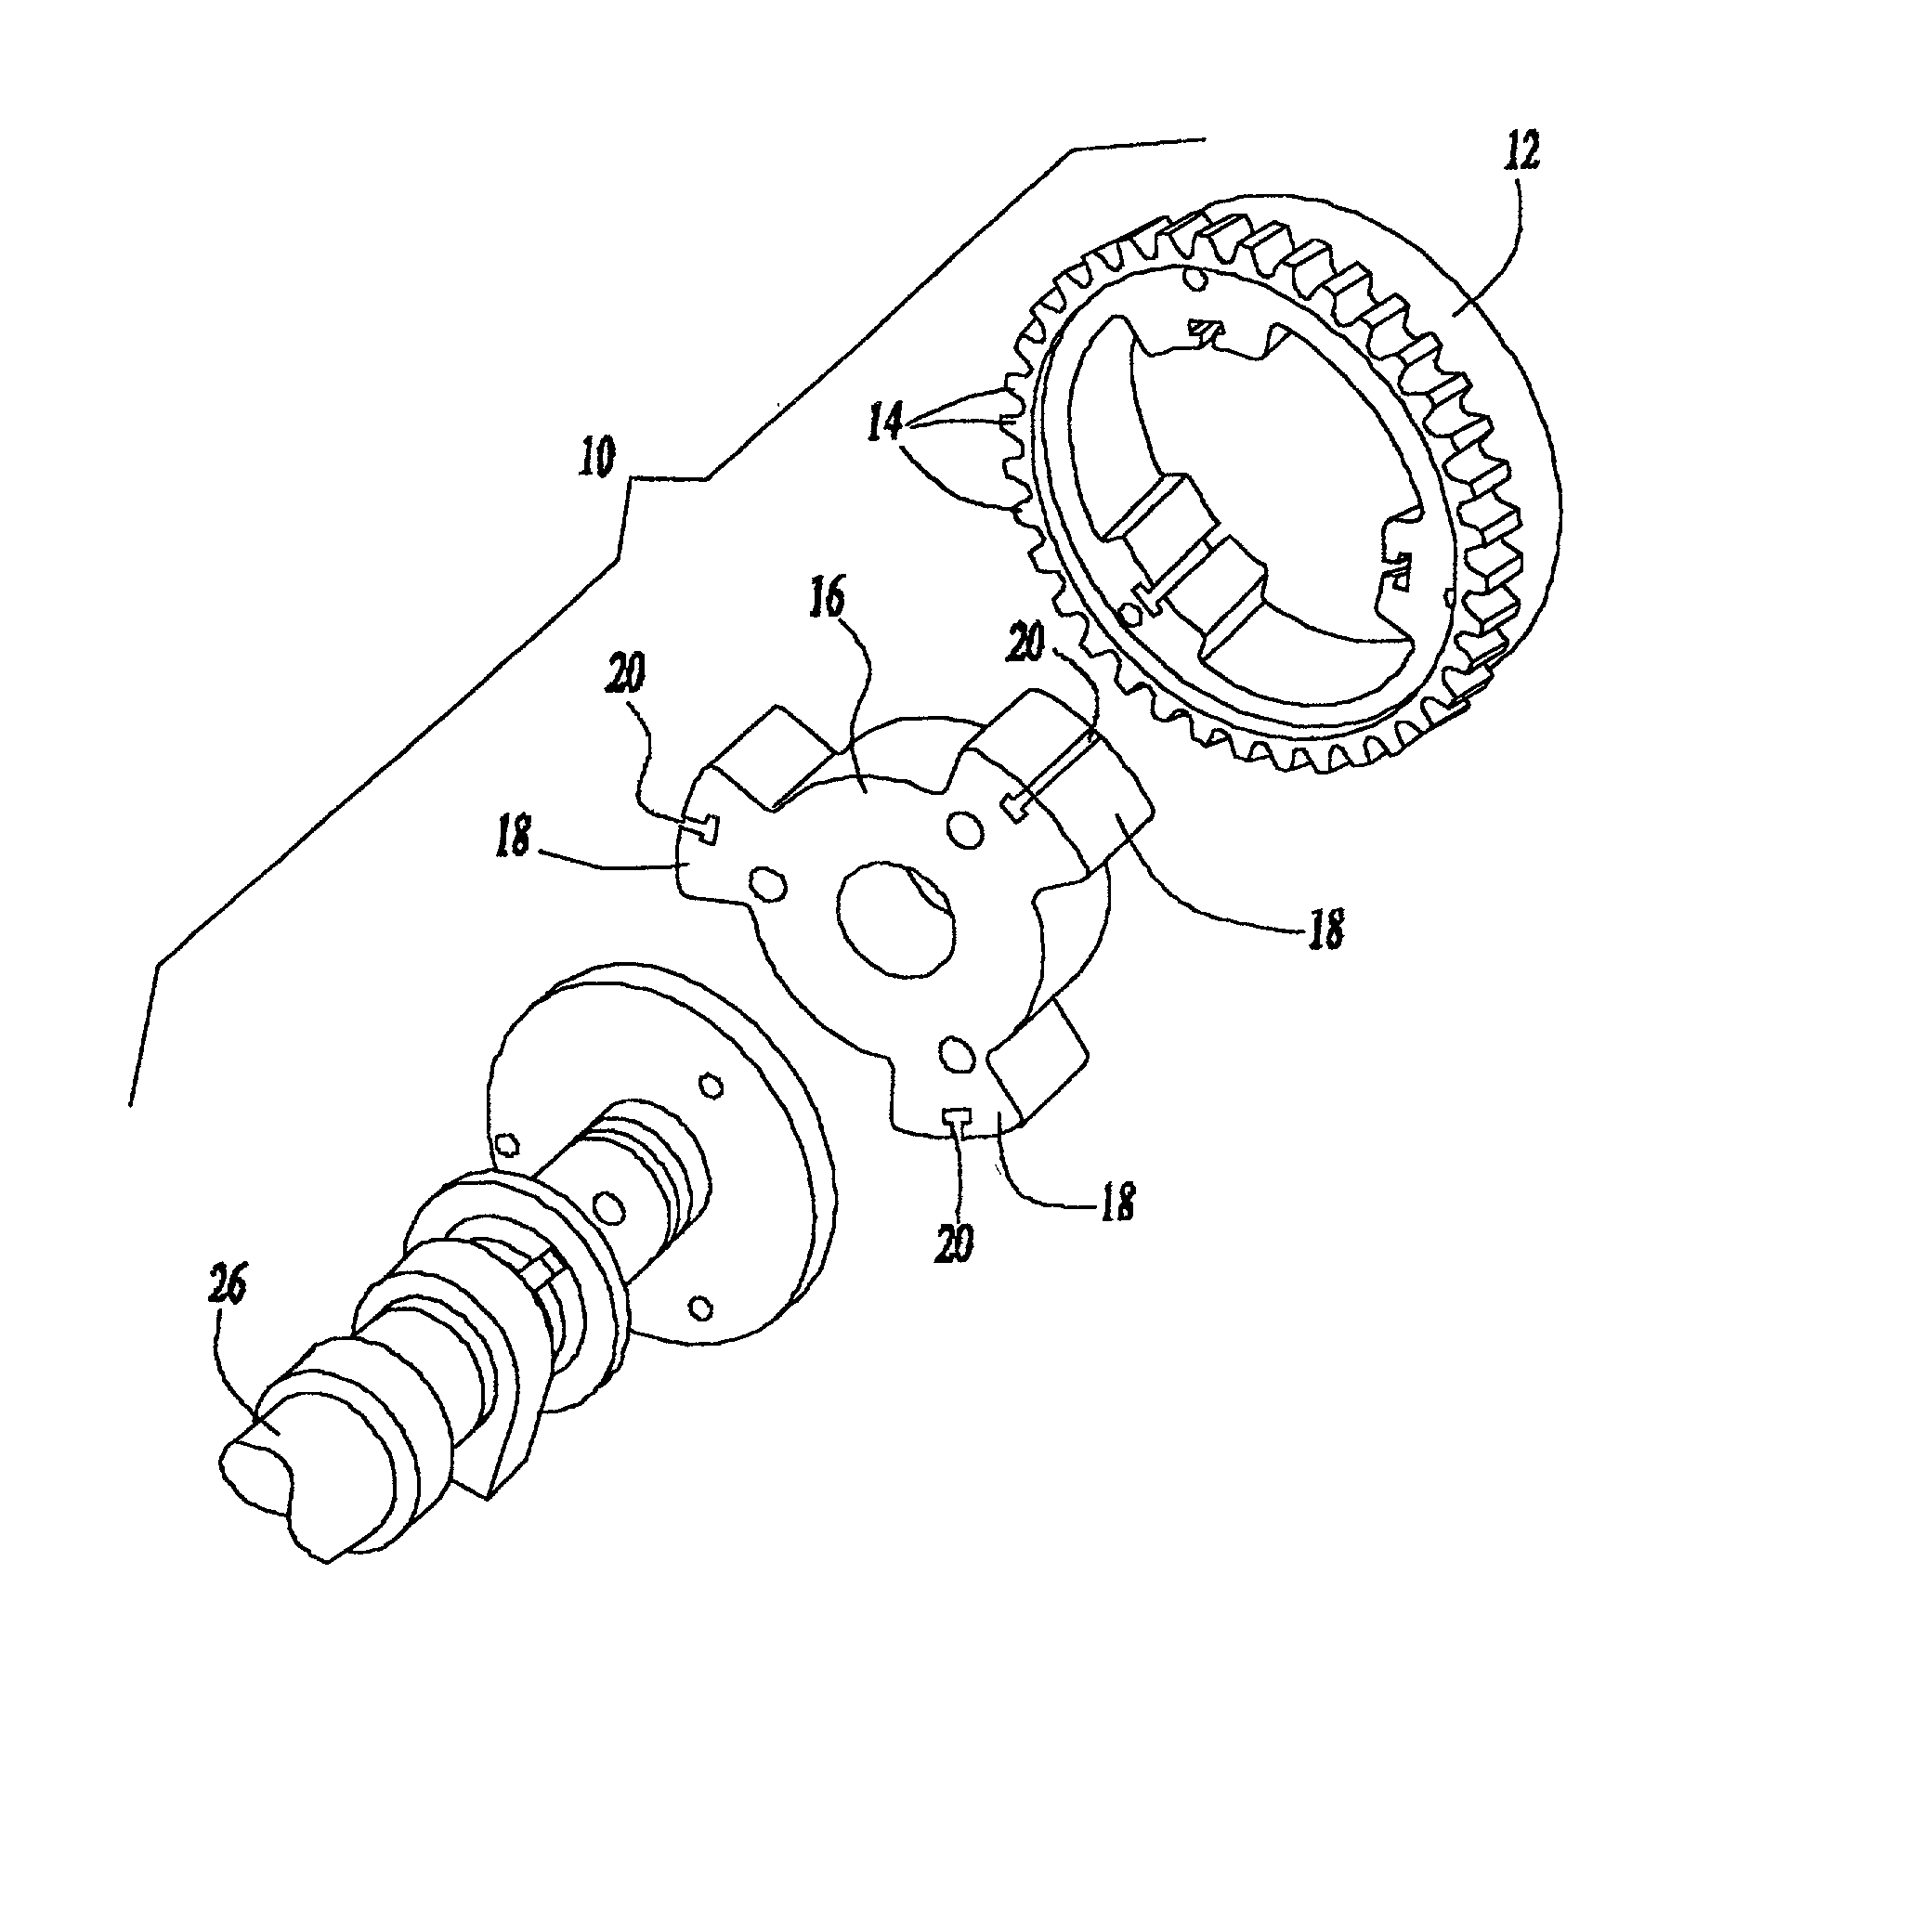 Multi-mode control system for variable camshaft timing devices